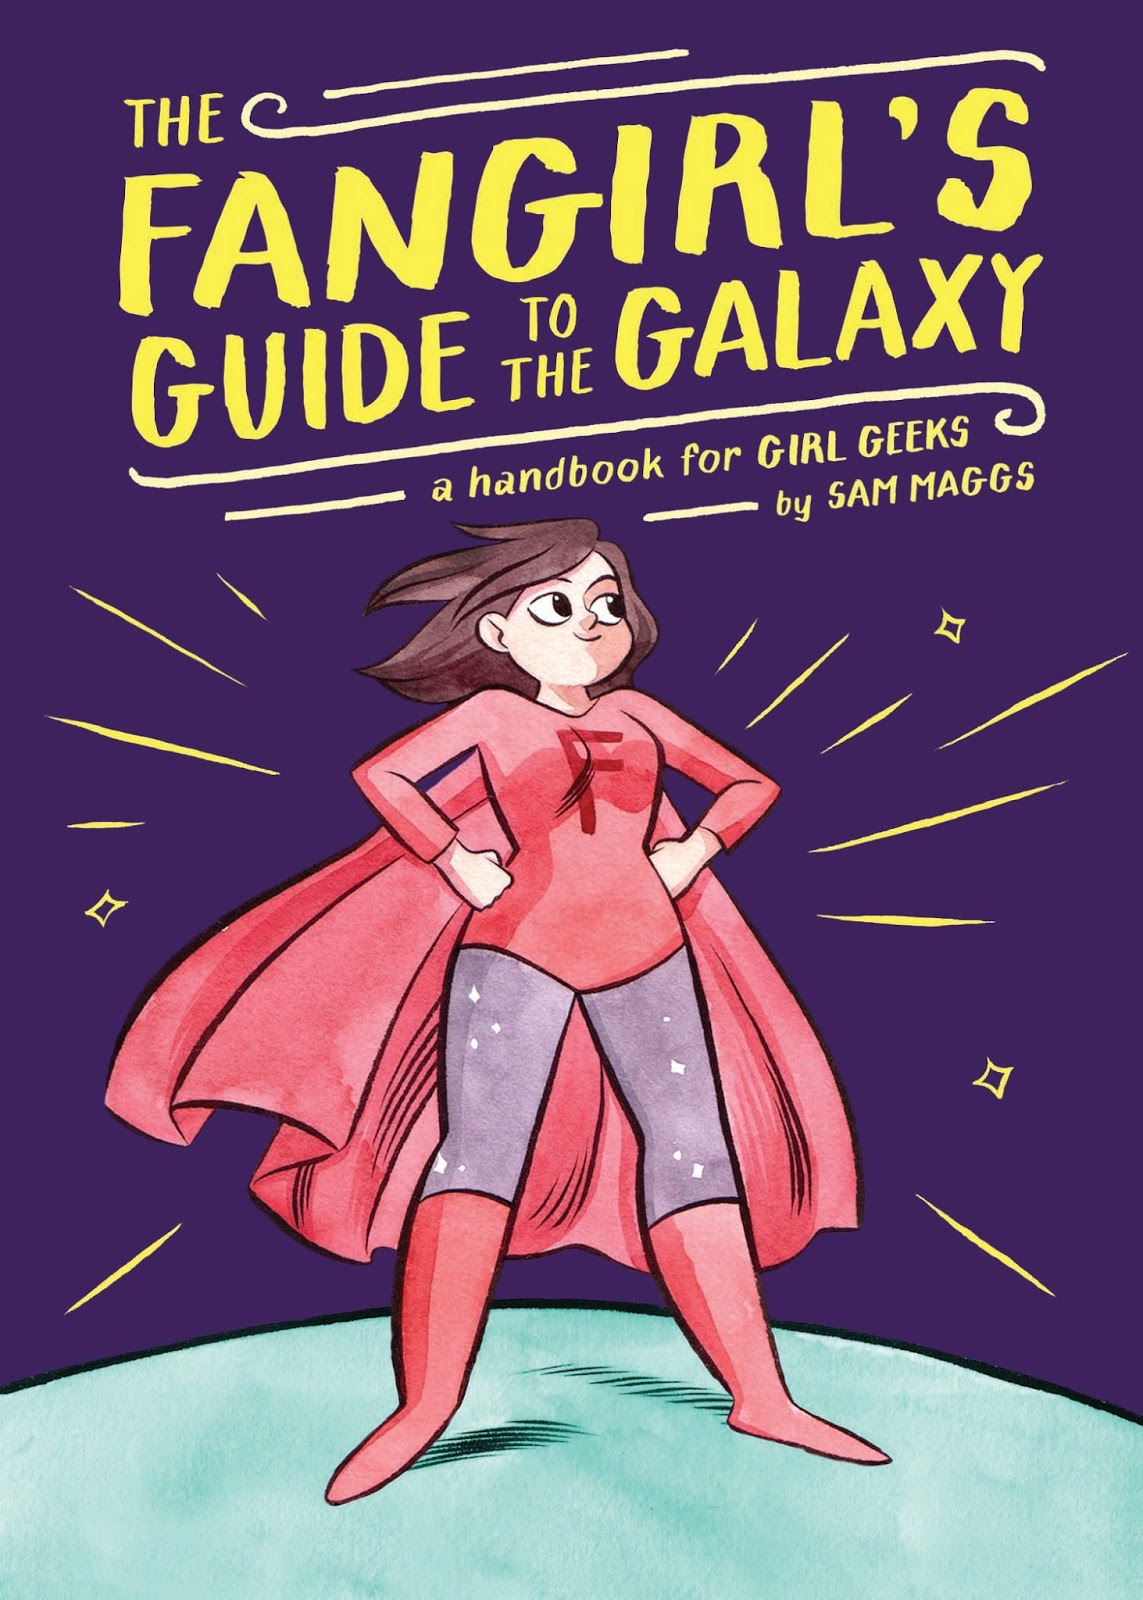 http://nothingbutn9erz.blogspot.co.at/2015/06/the-fangirls-guide-to-galaxy-sam-maggs.html